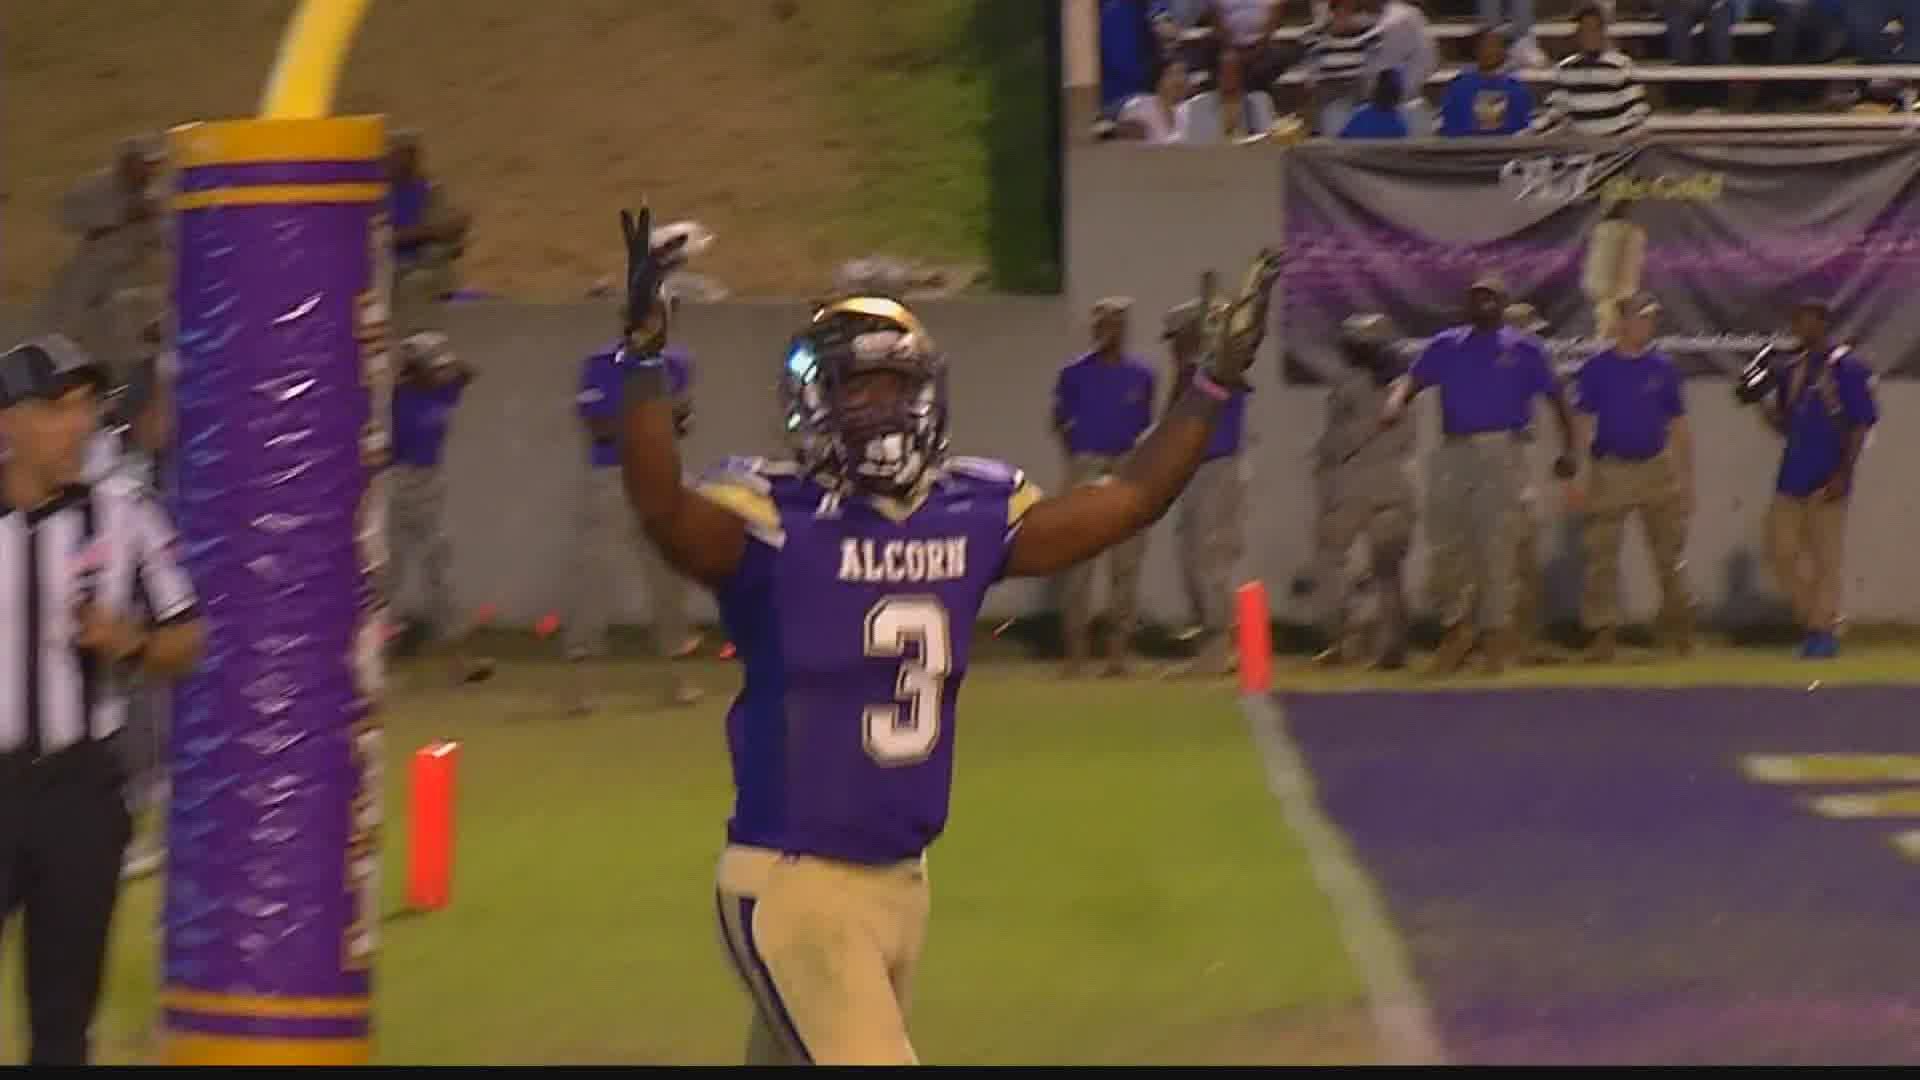 Alcorn State University announces it will opt-out of 2021 spring football season